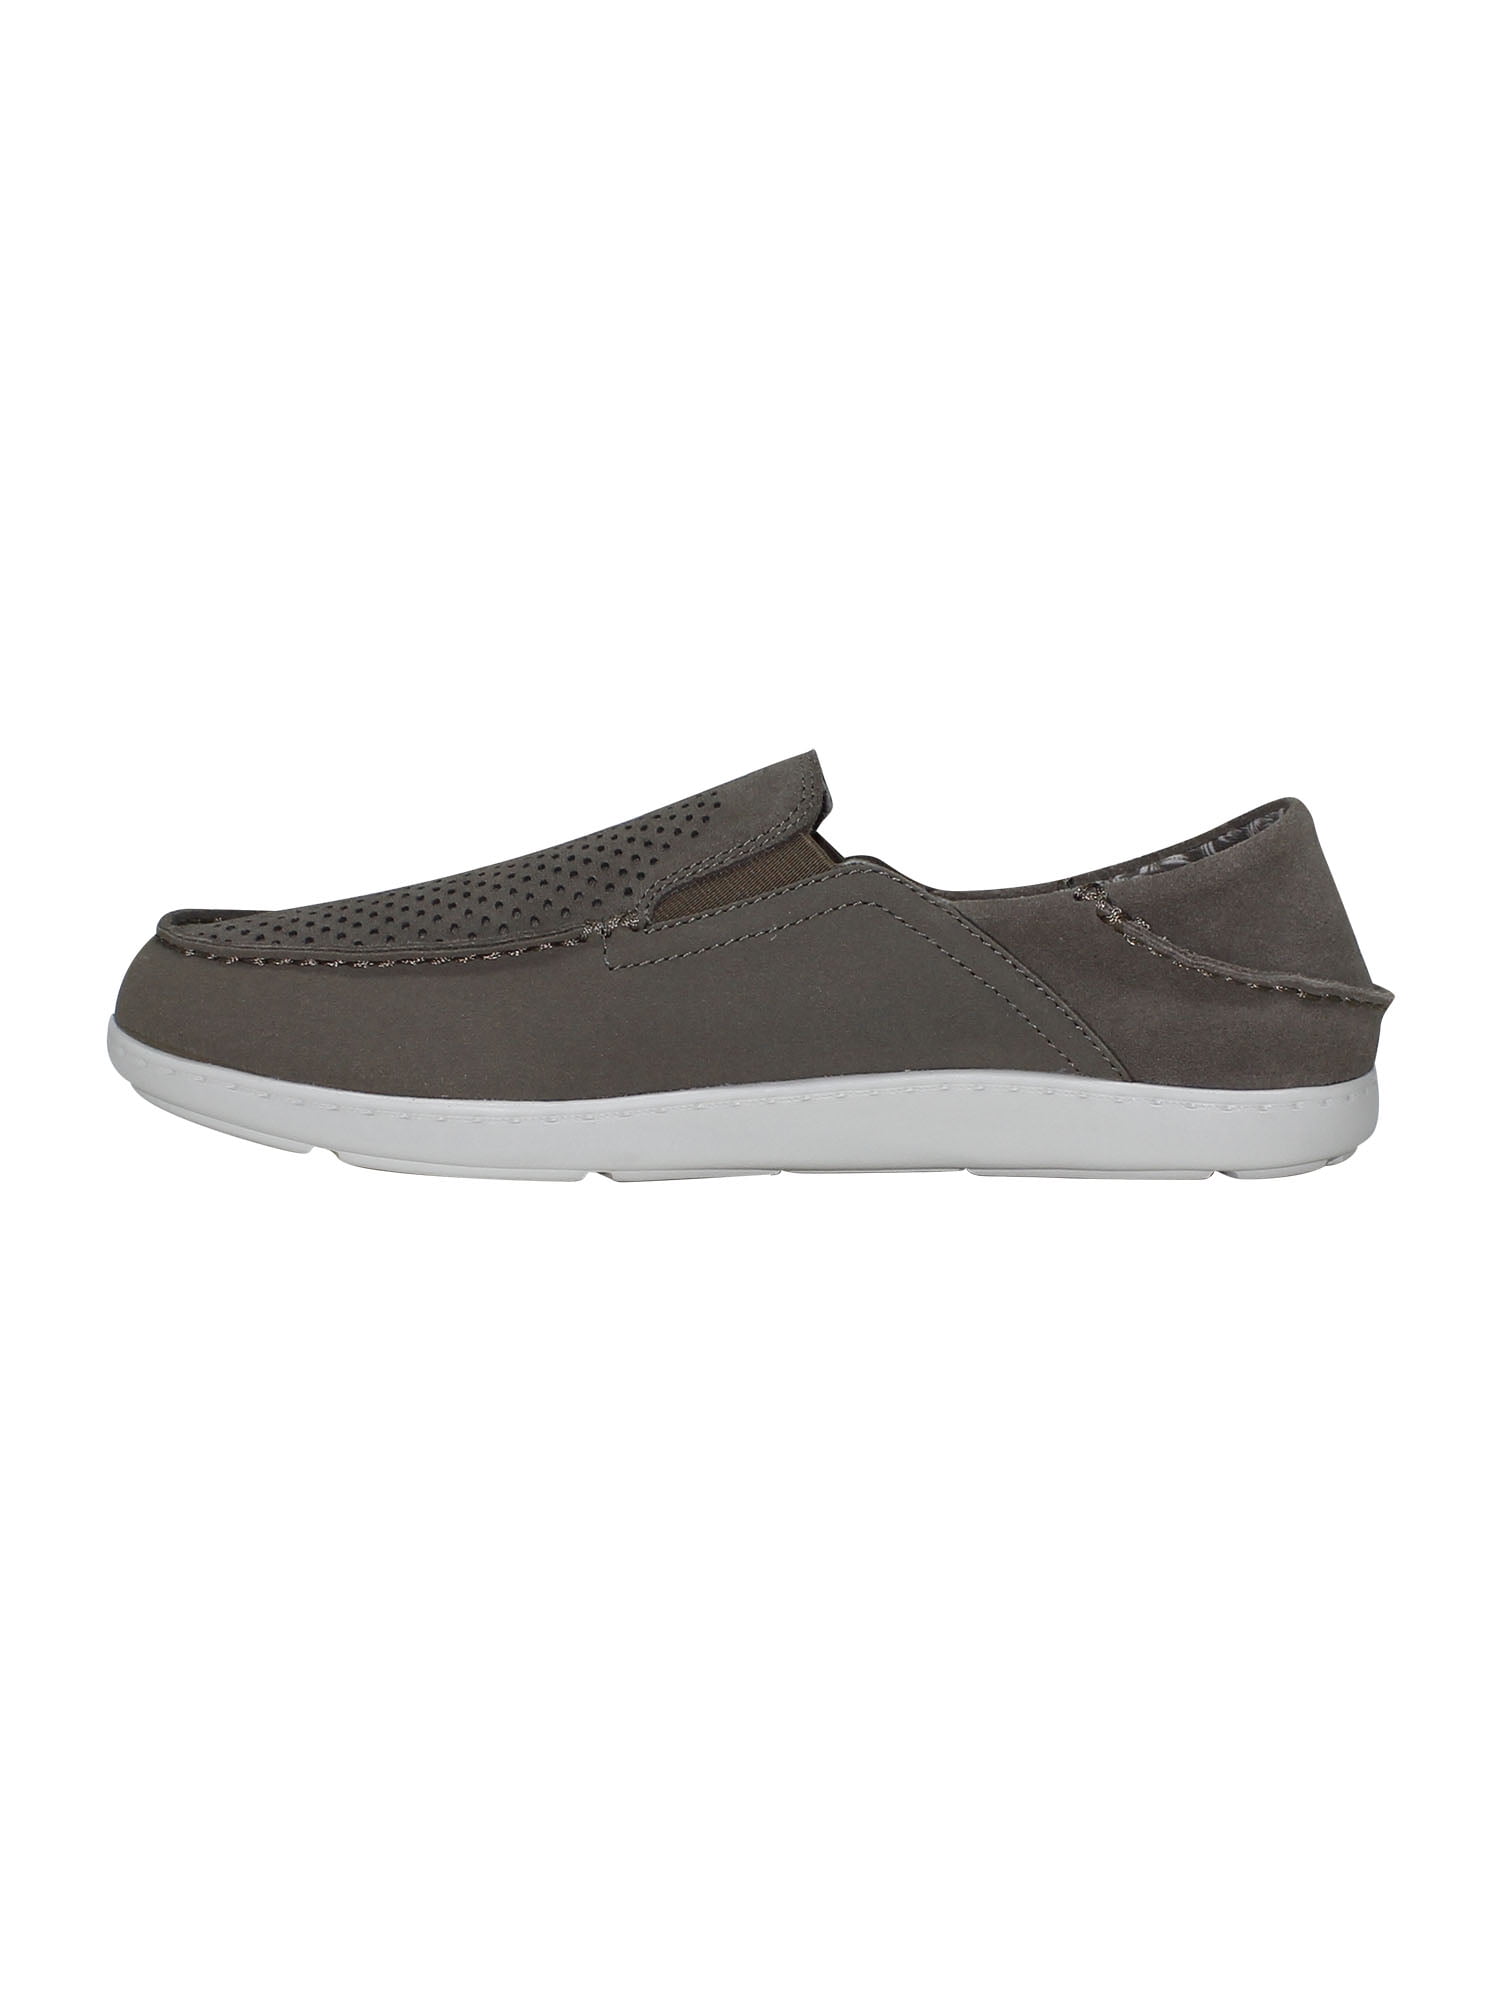 george men's casual suede shoes